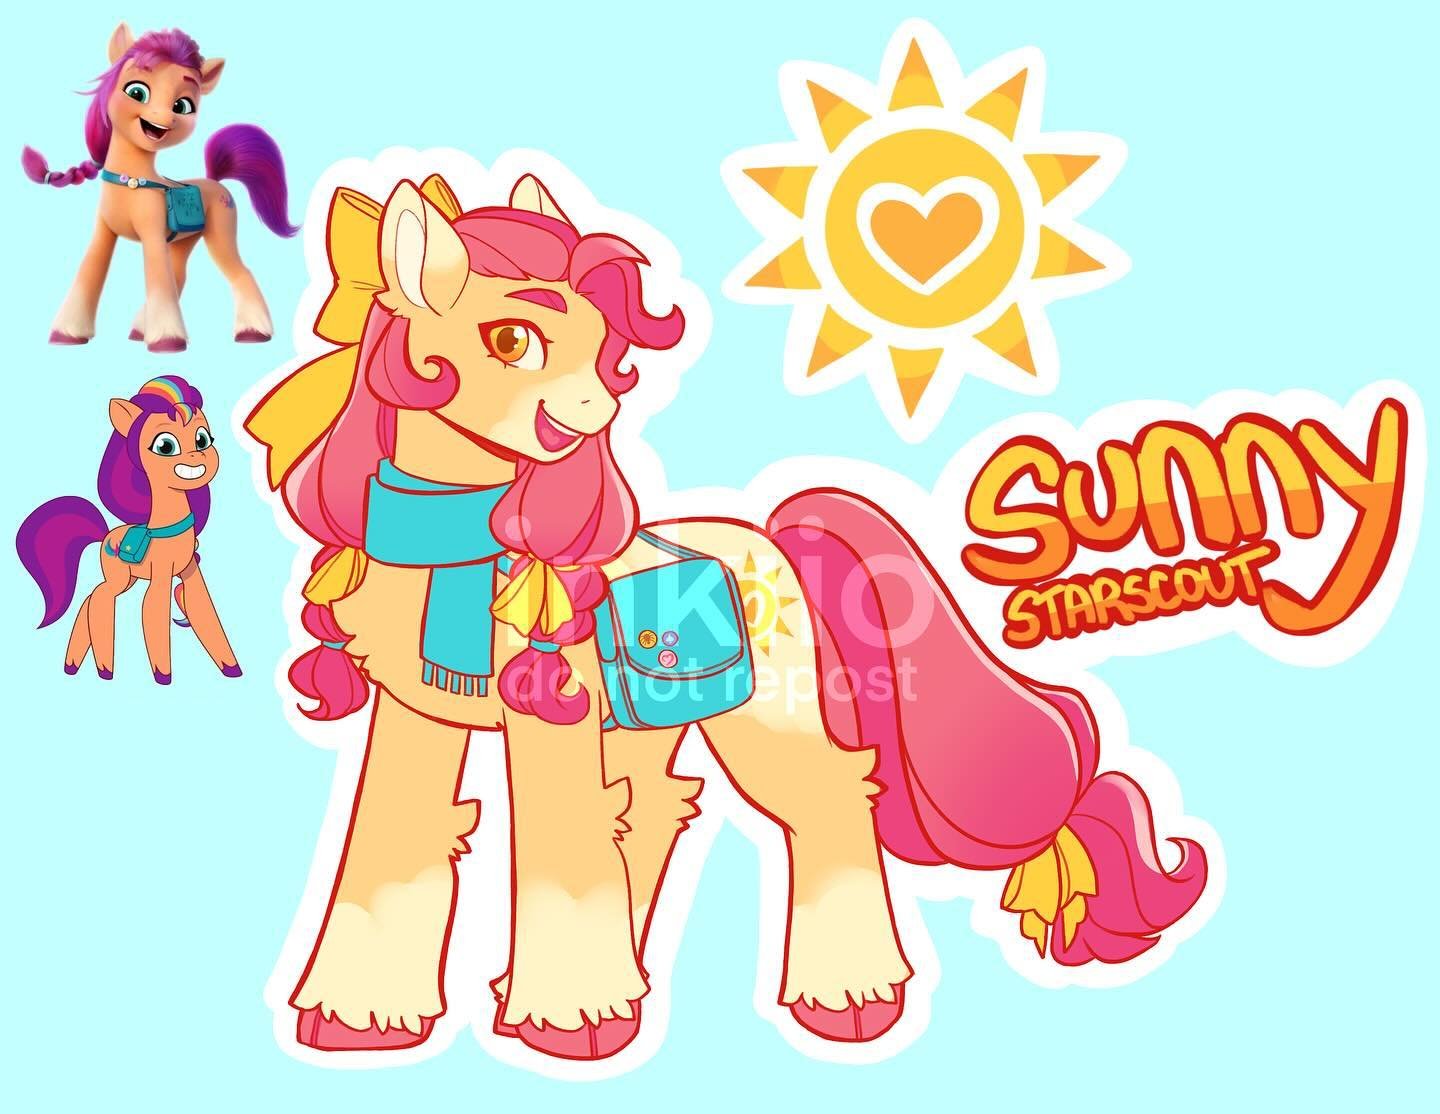 sunny redesign from my most recent video! check out the video on my channel!
-
-
-
-
#inkiio #sunnystarscout #sunnymlp #mlp #mlpg5 #mylittlepony #mylittleponyg5 #mlpgen5